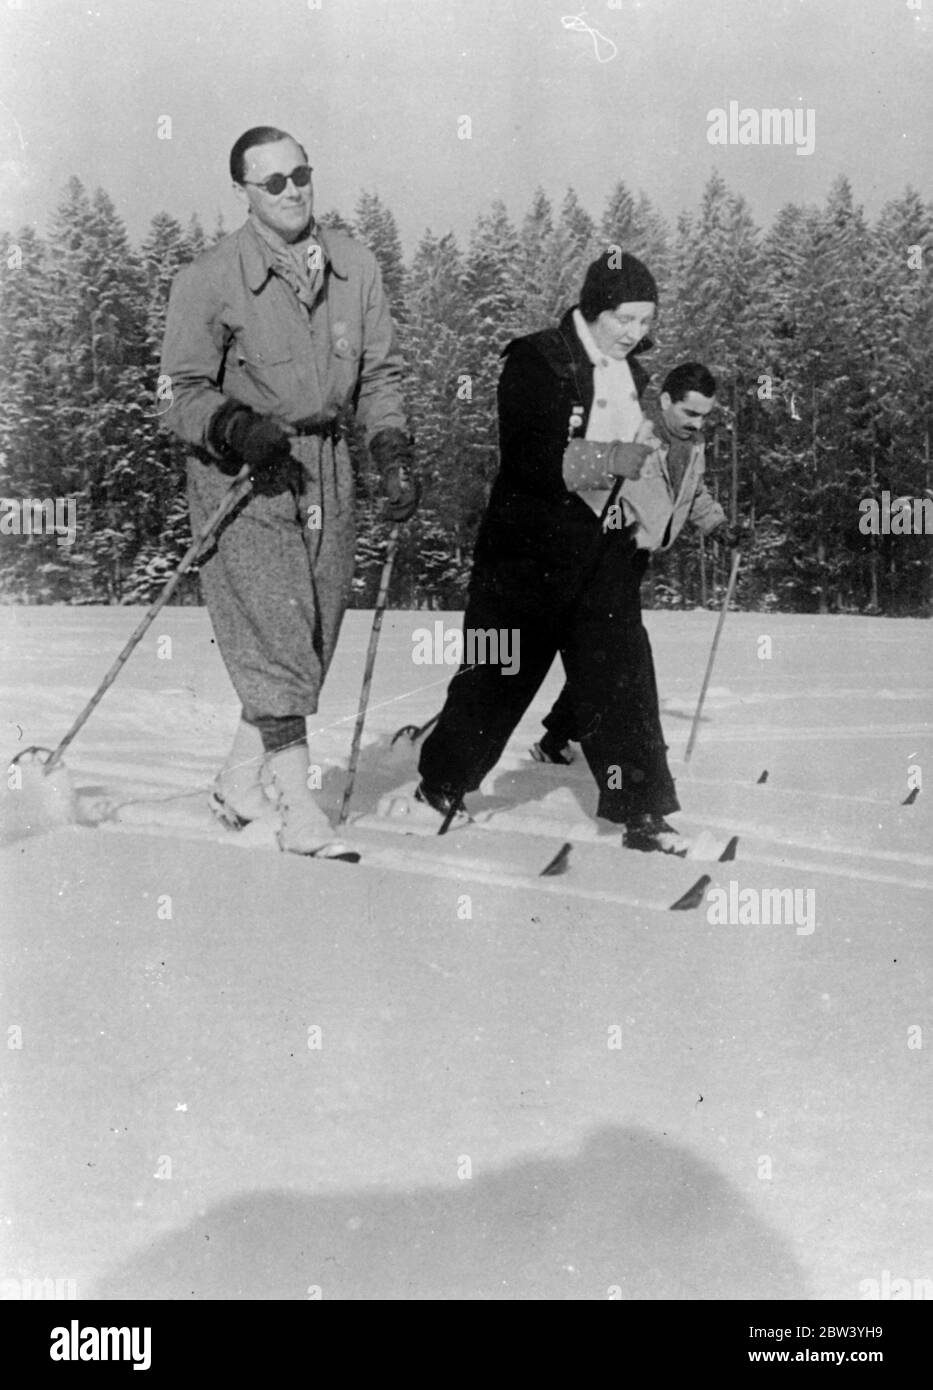 Skiing retains Princess Juliana's favour. Out each day at Krynica. Skiing is the favourite sport of Princess Juliana of Holland and her consort, Prince Bernhard, at Krynica, the Polish winter sports resort where they are spending the first part of their honeymoon. Photo shows: Princess Juliana and her husband, Prince Bernhard, skiing at Krynica. 27 January 1937 Stock Photo